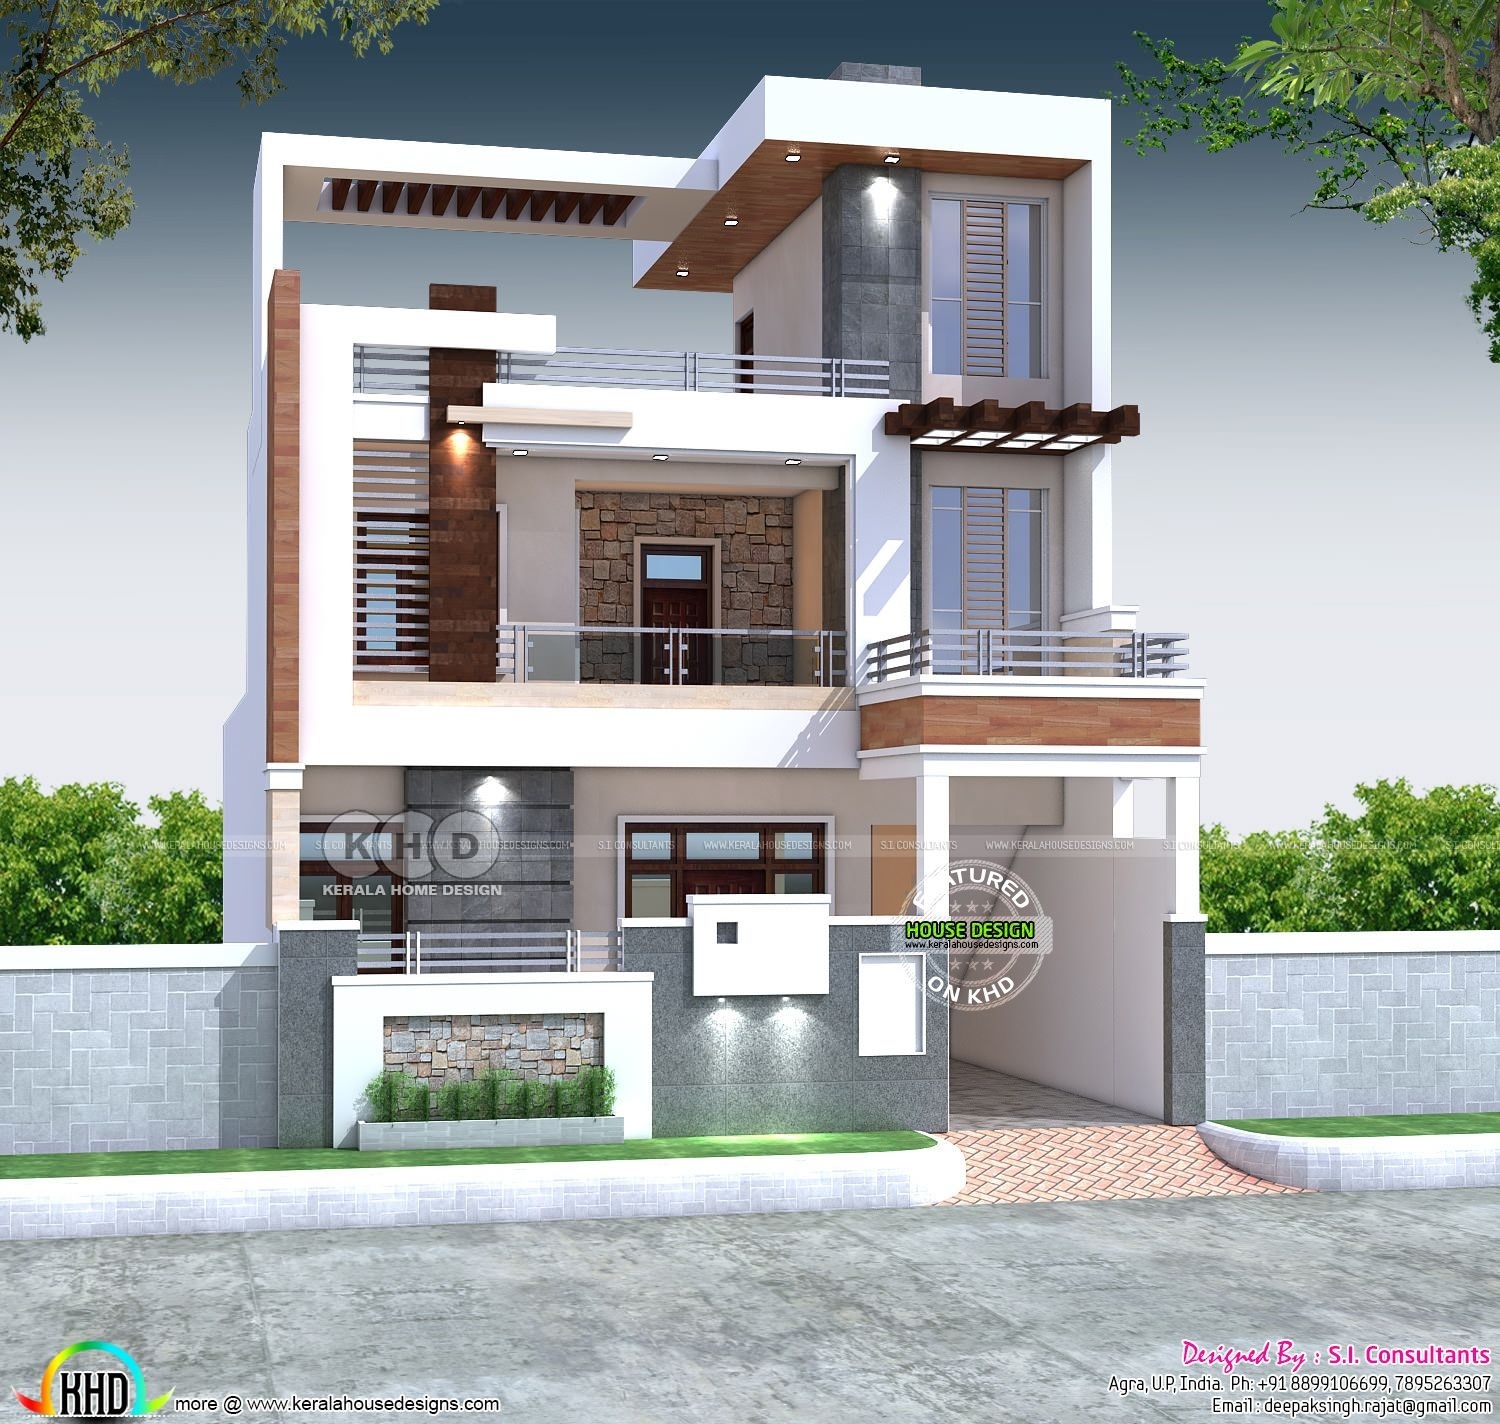 Incredible 5 bhk 3000 square feet modern home kerala home design and floor plans regarding home 1500 sq indian hd image